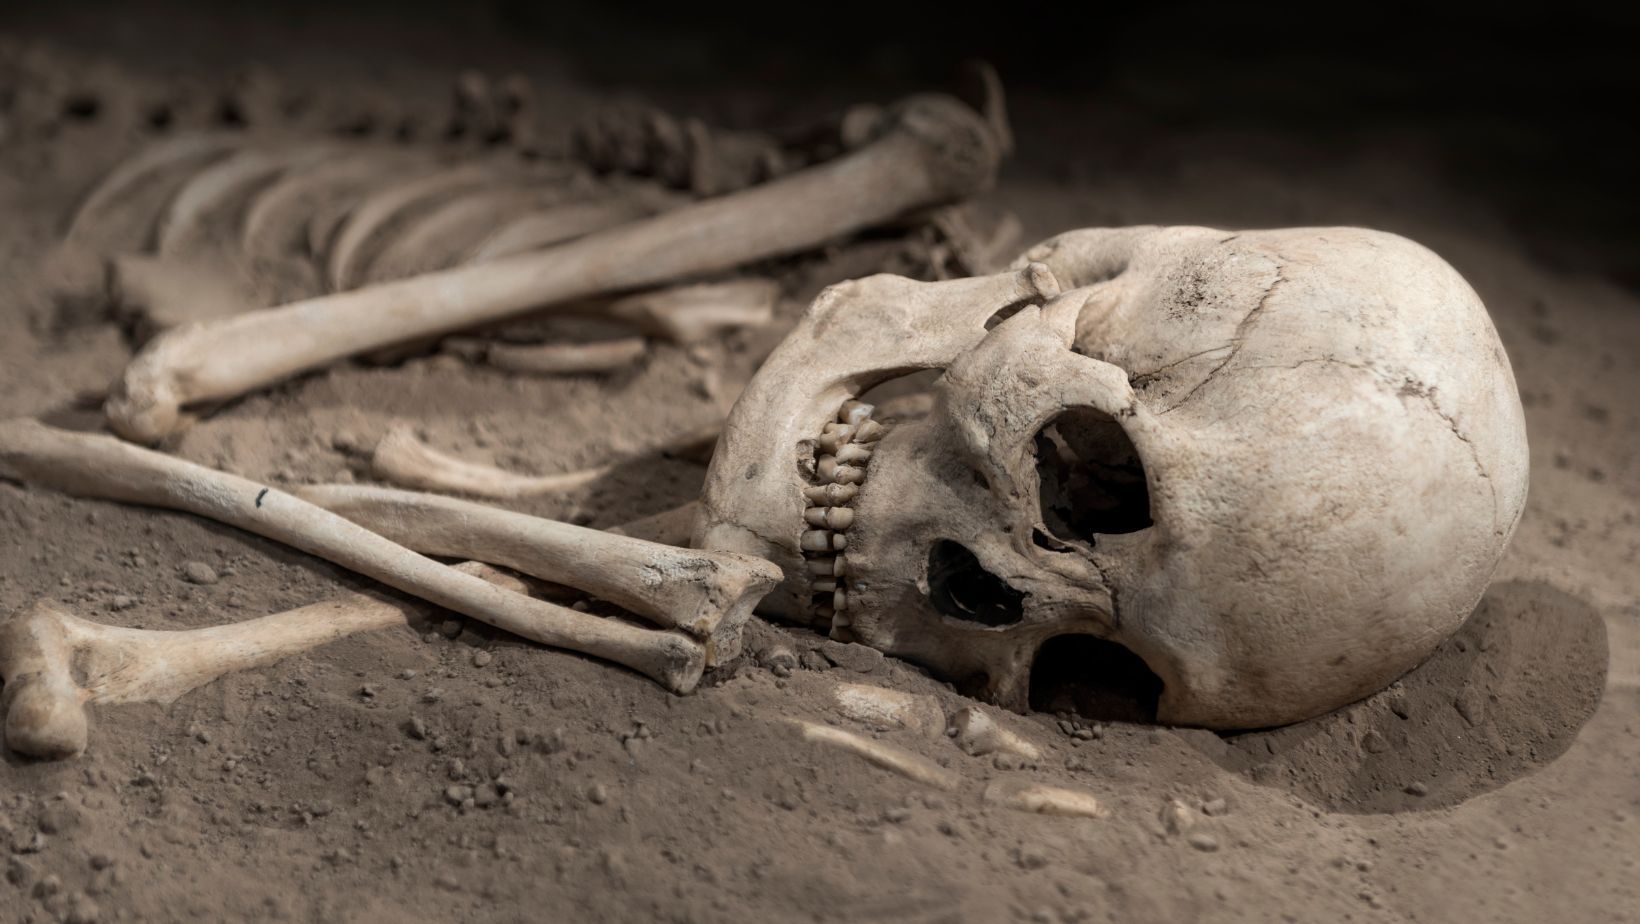 An image of skeleton remains.